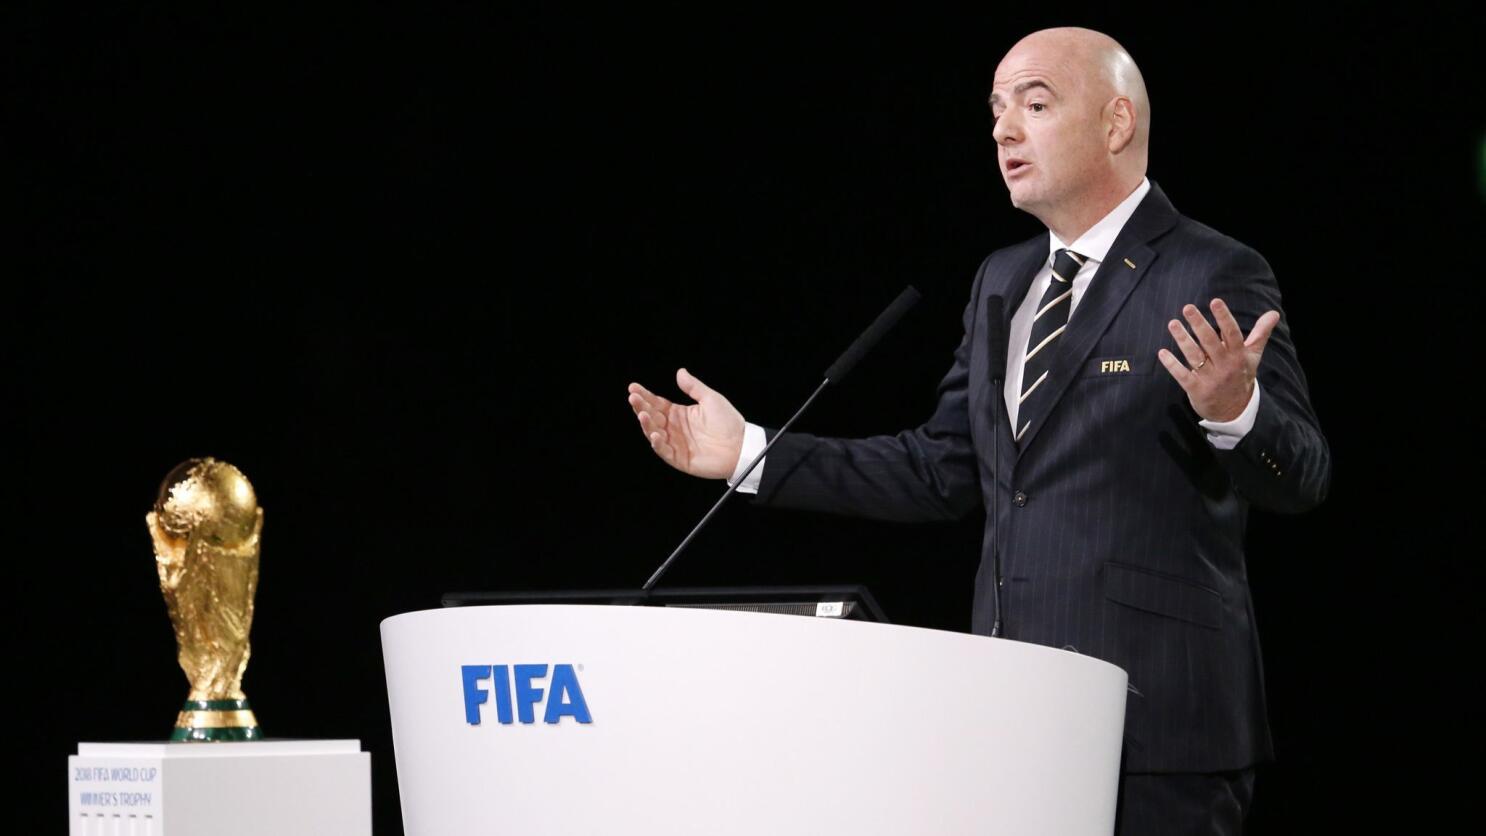 Lobbying for FIFA World Cup host committees kicks off